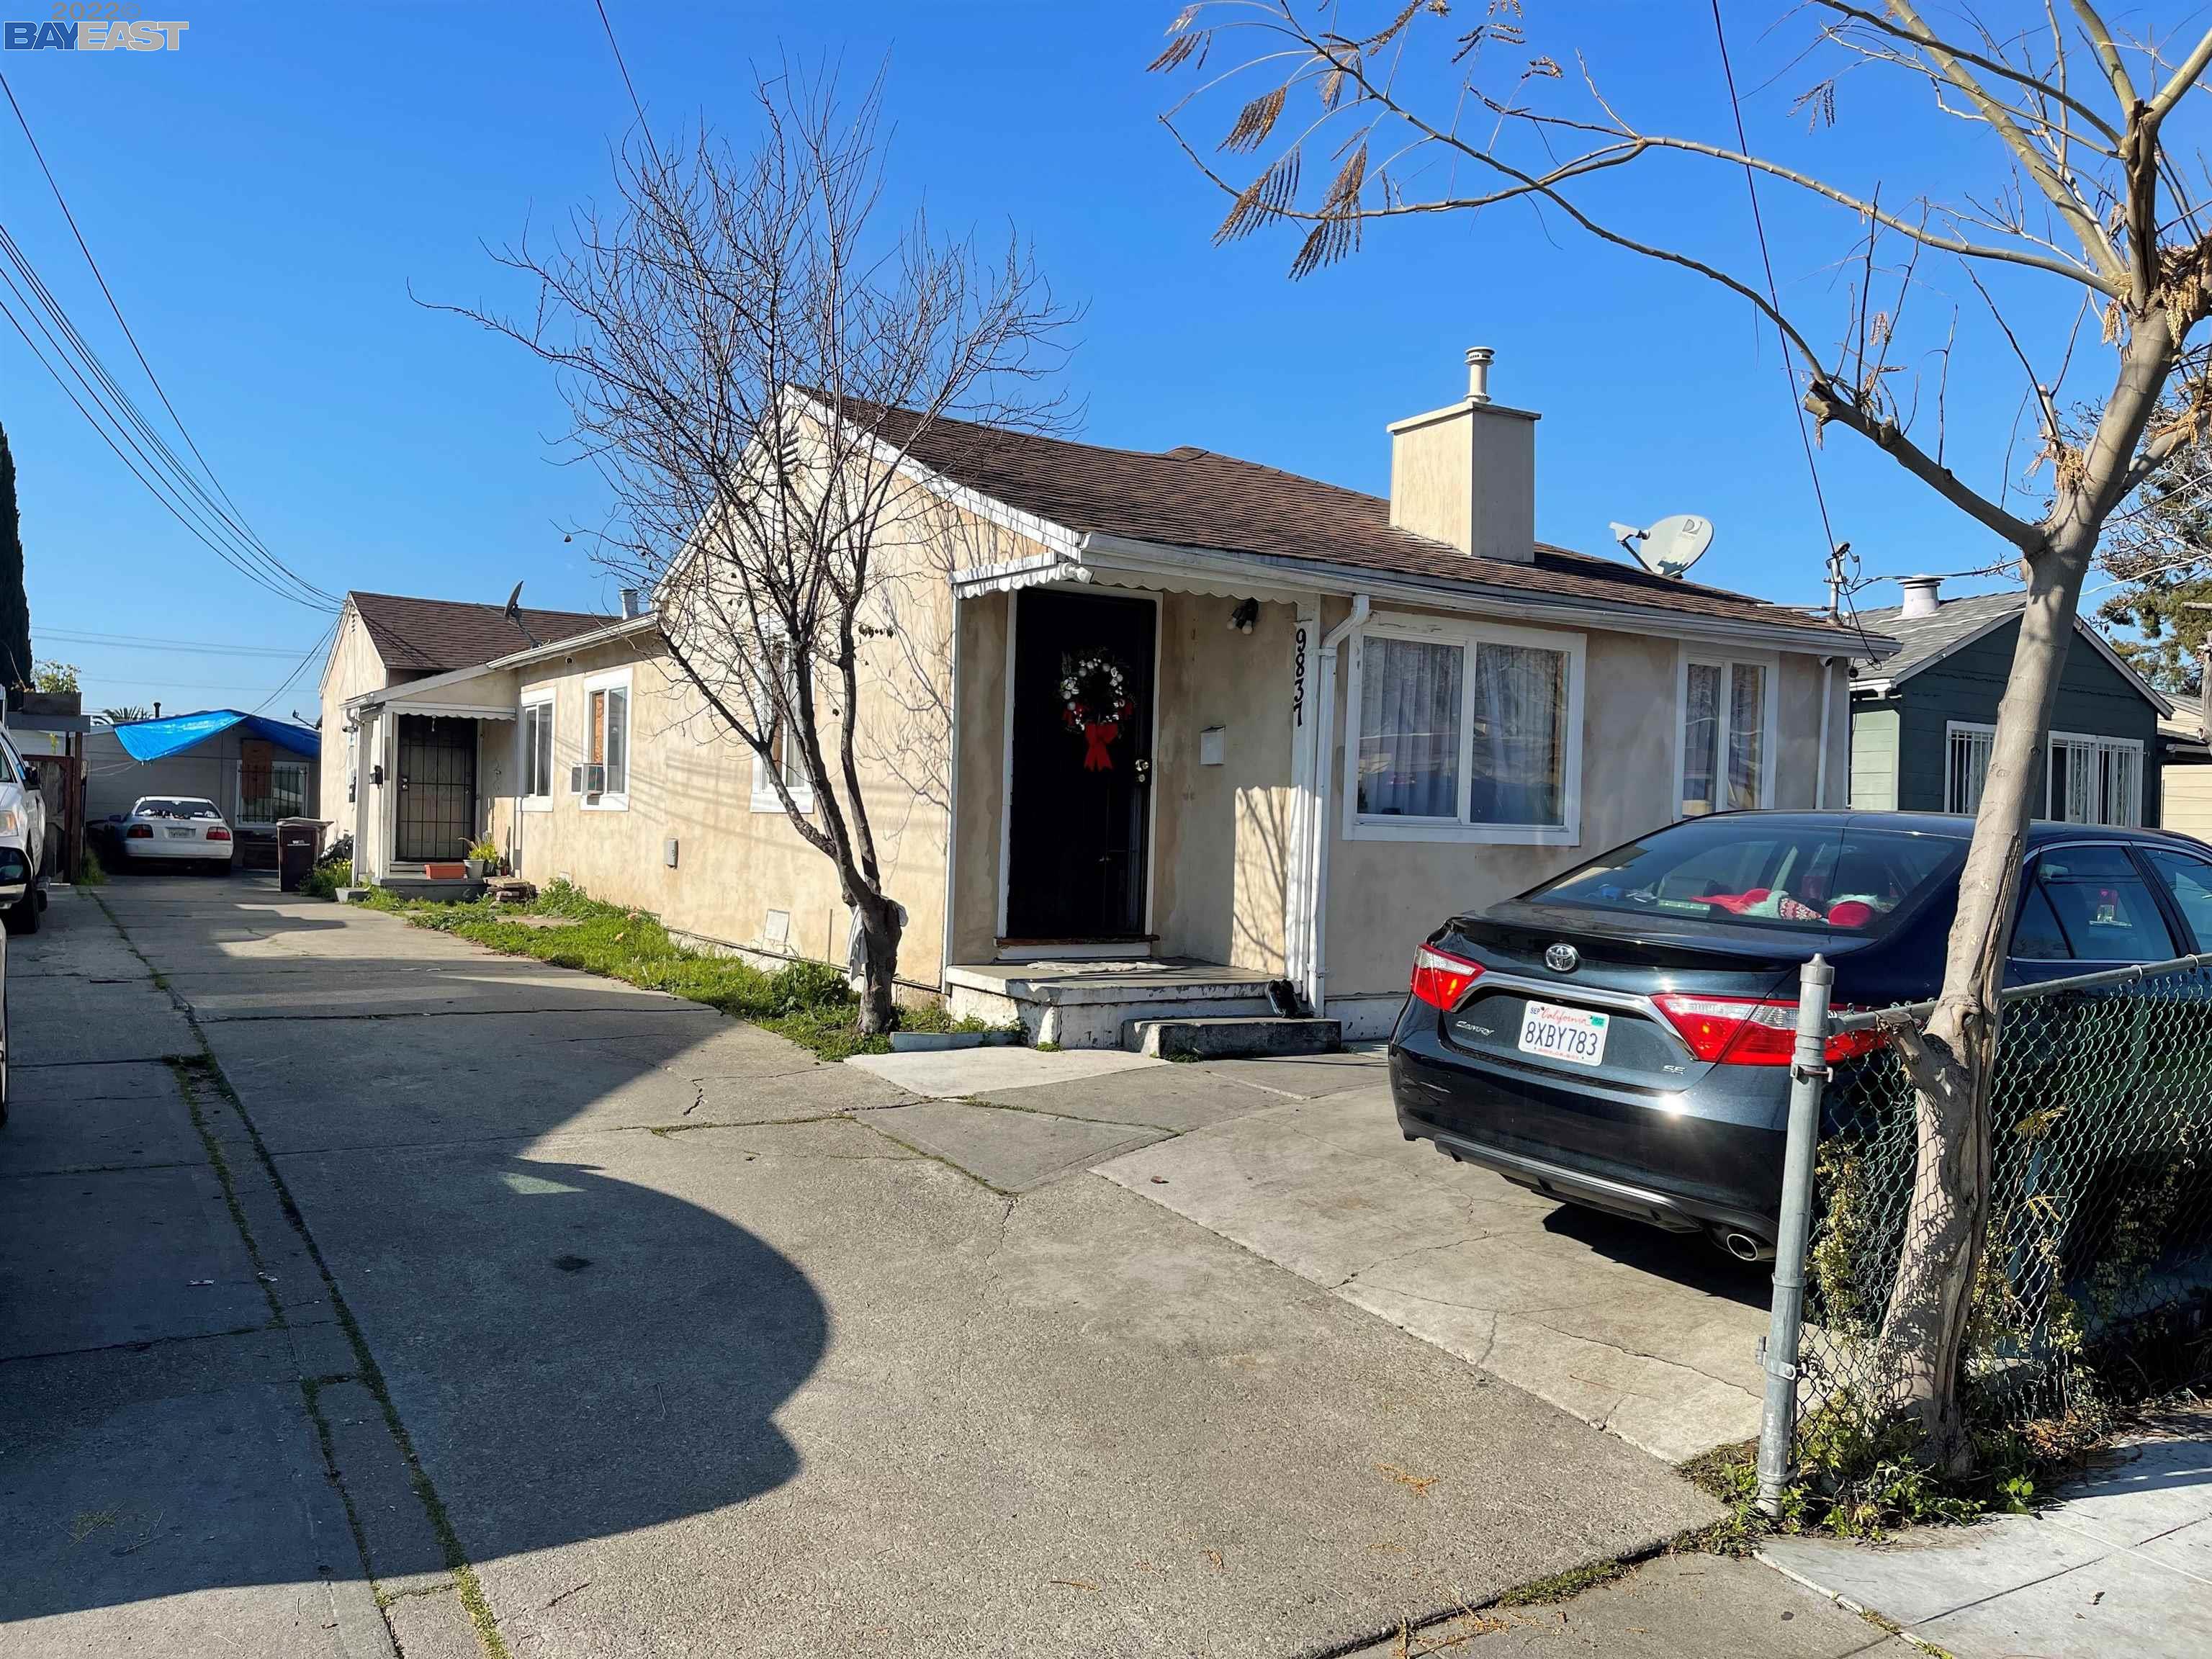 Photo of 9837 Plymouth St in Oakland, CA